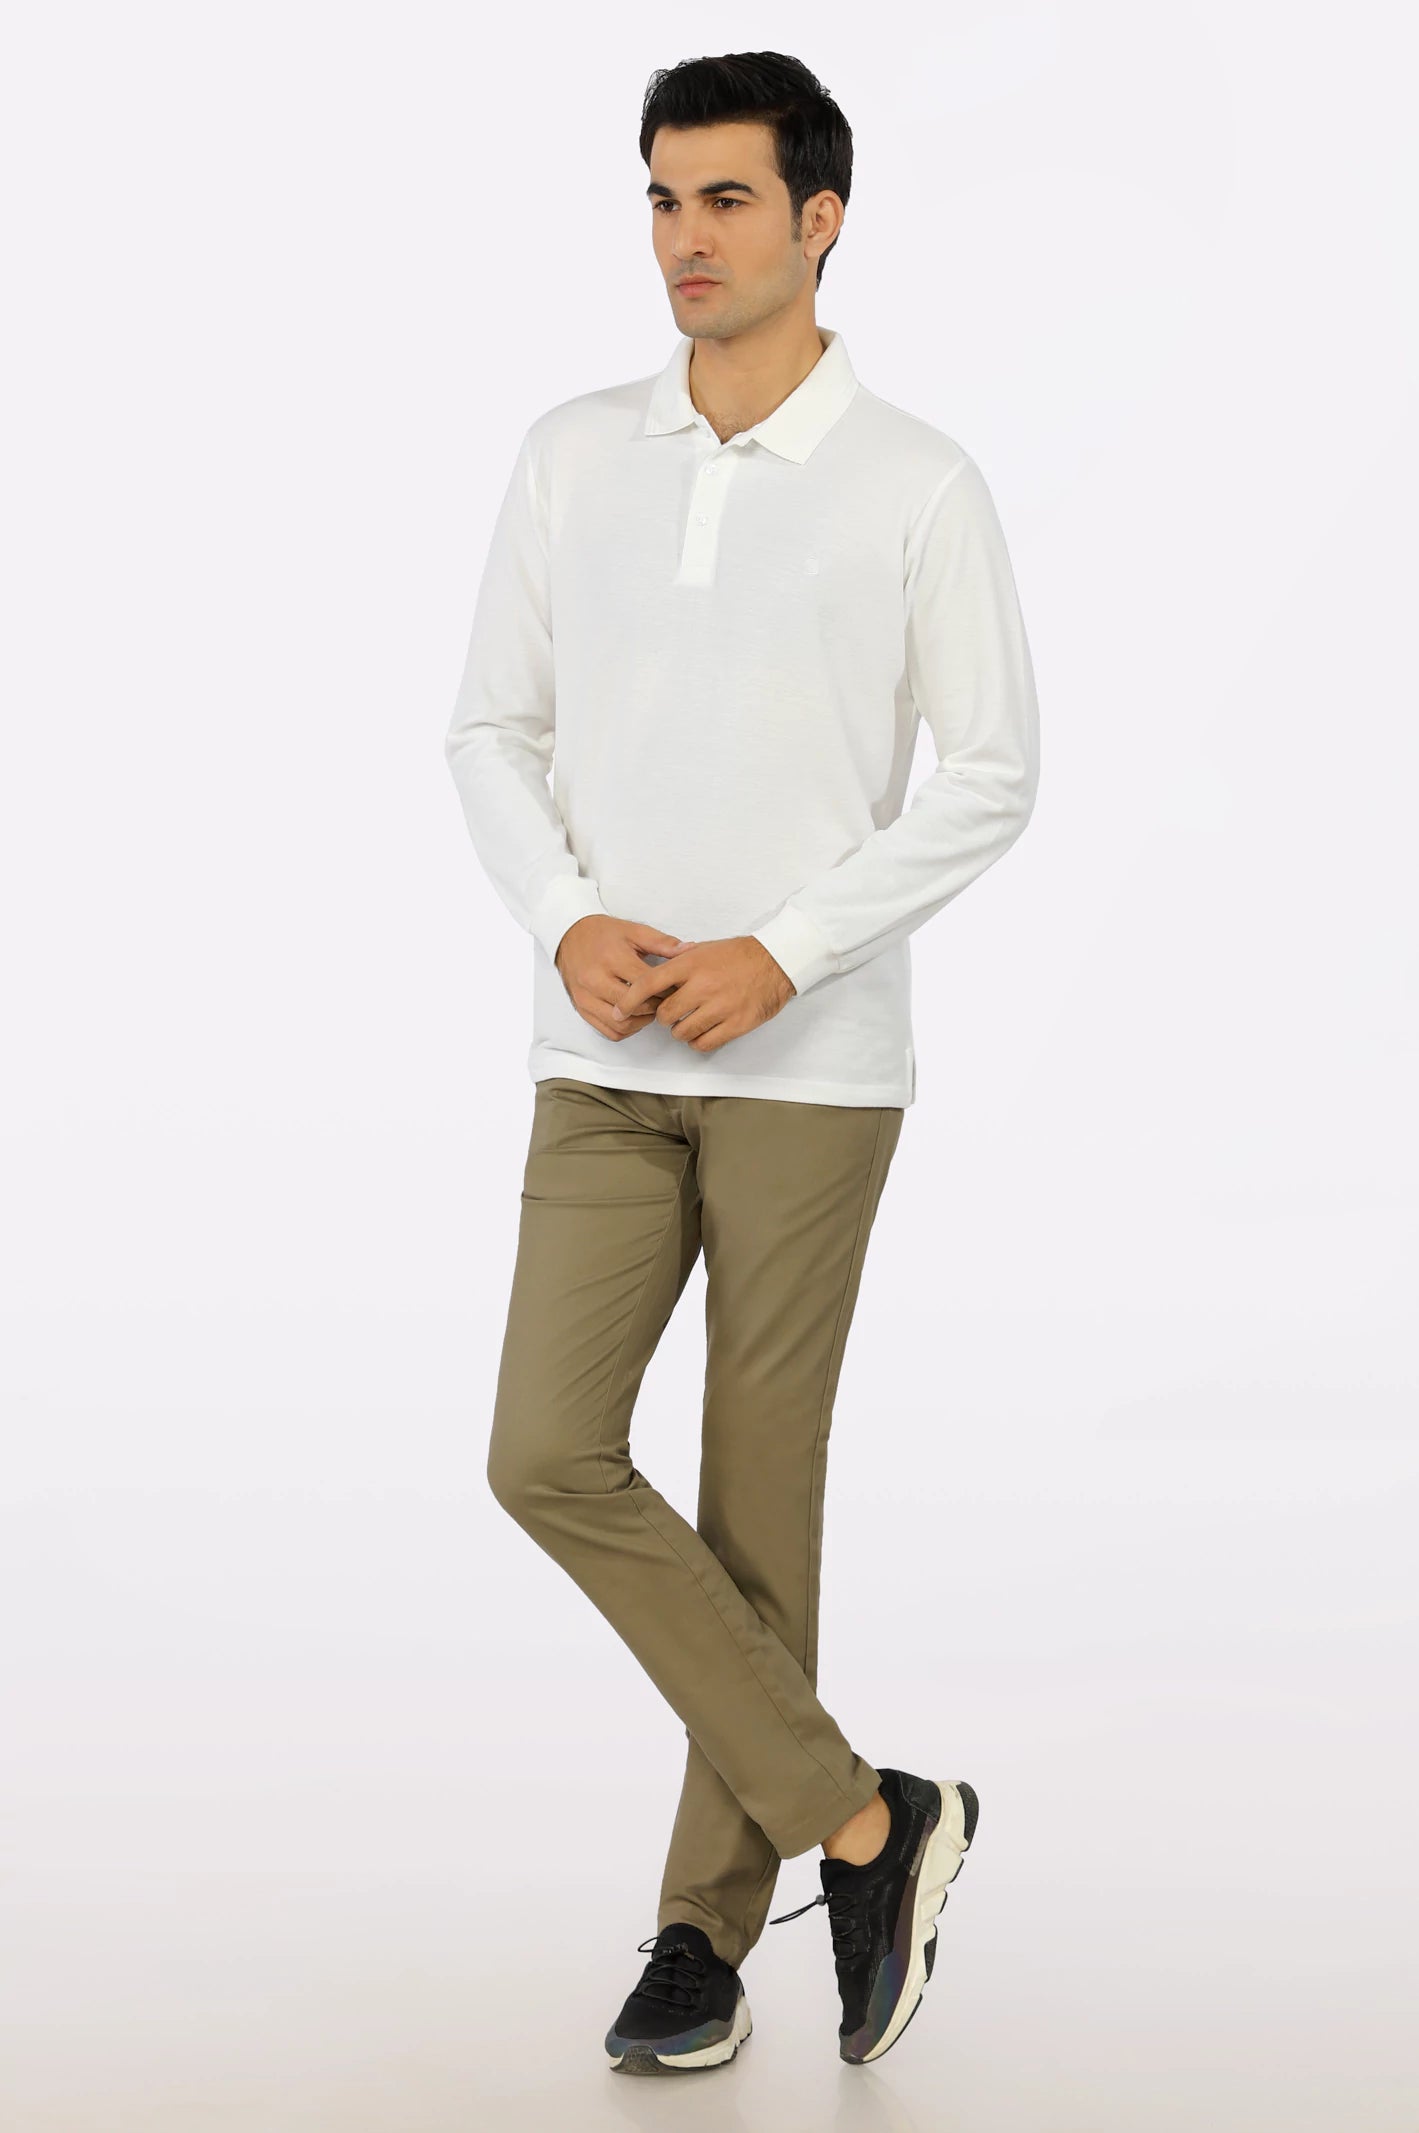 White Long Sleeves Polo From Diners